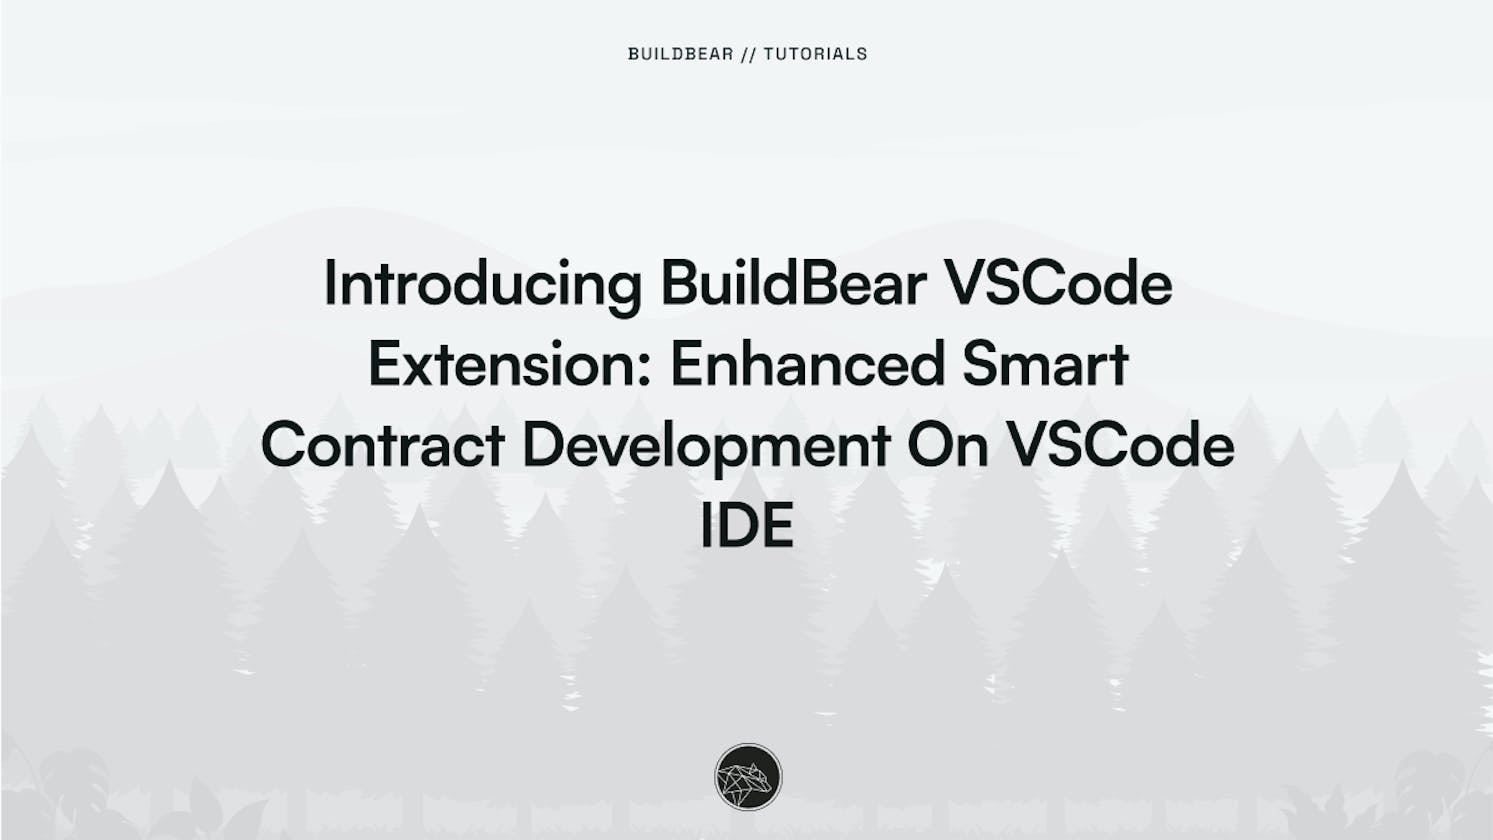 Introducing the BuildBear VSCode Extension: Enhanced Smart Contract Development on VSCode IDE.